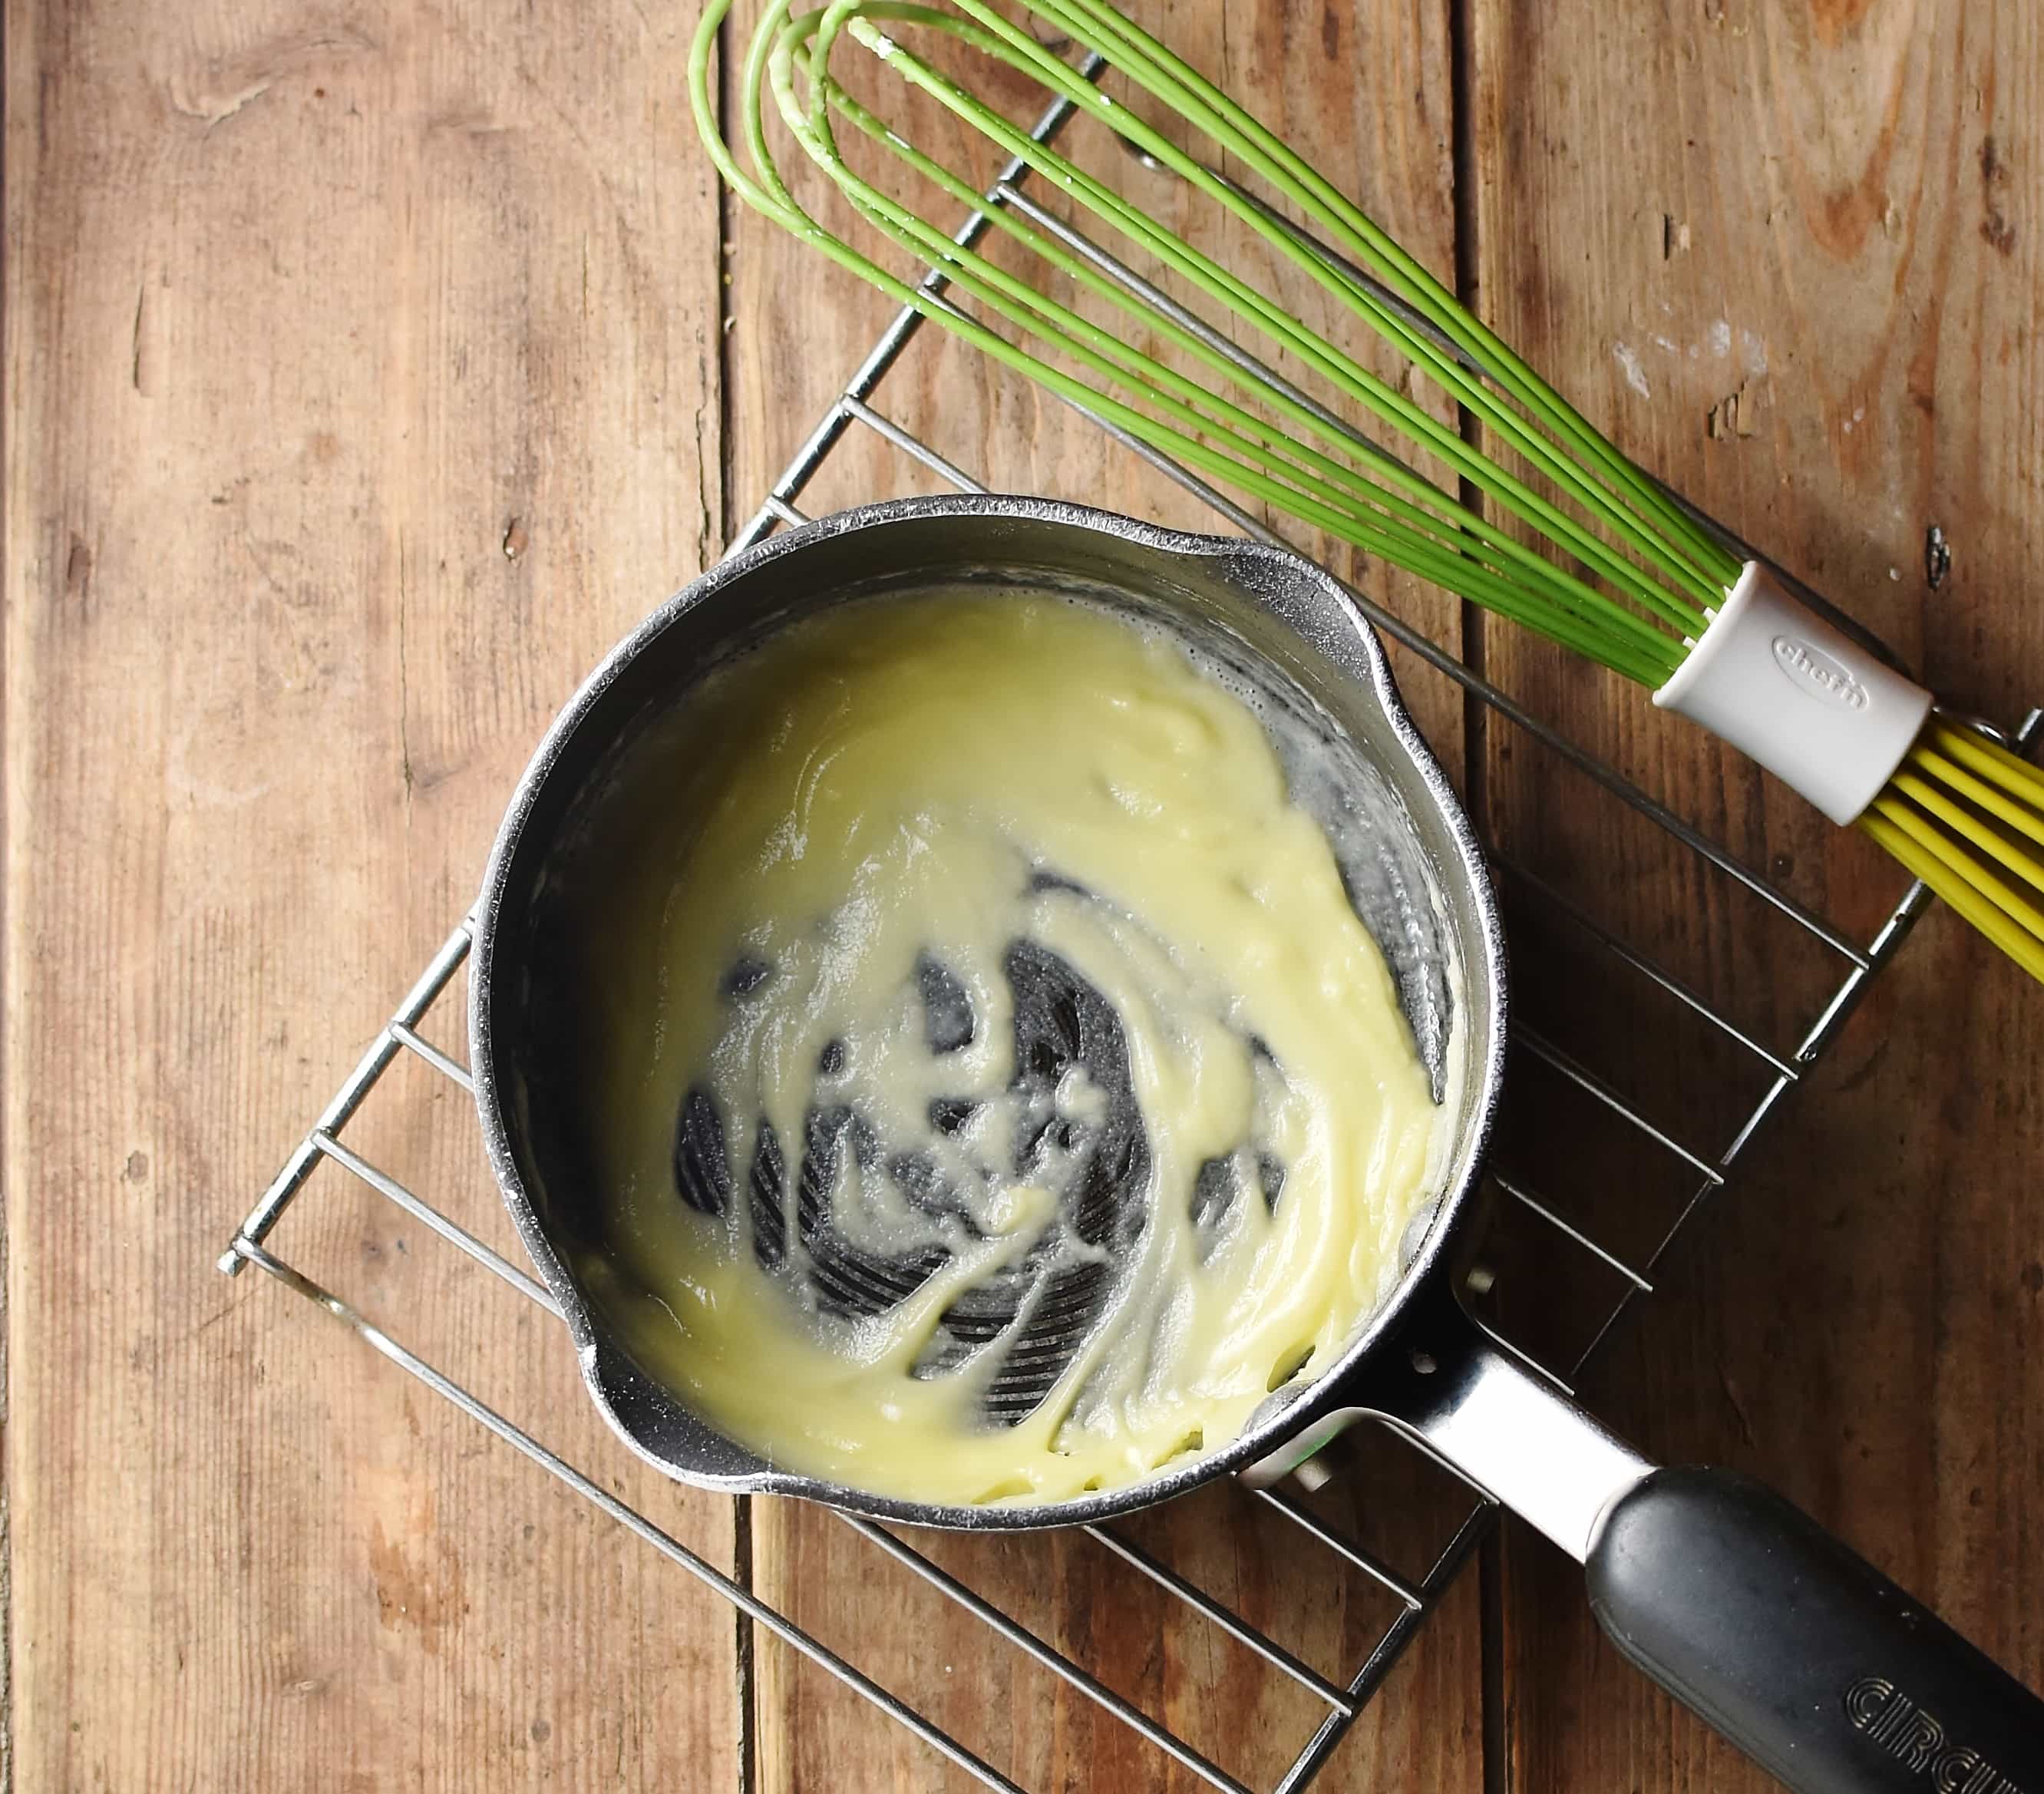 Roux in saucepan on top of rack with green whisk to the right.